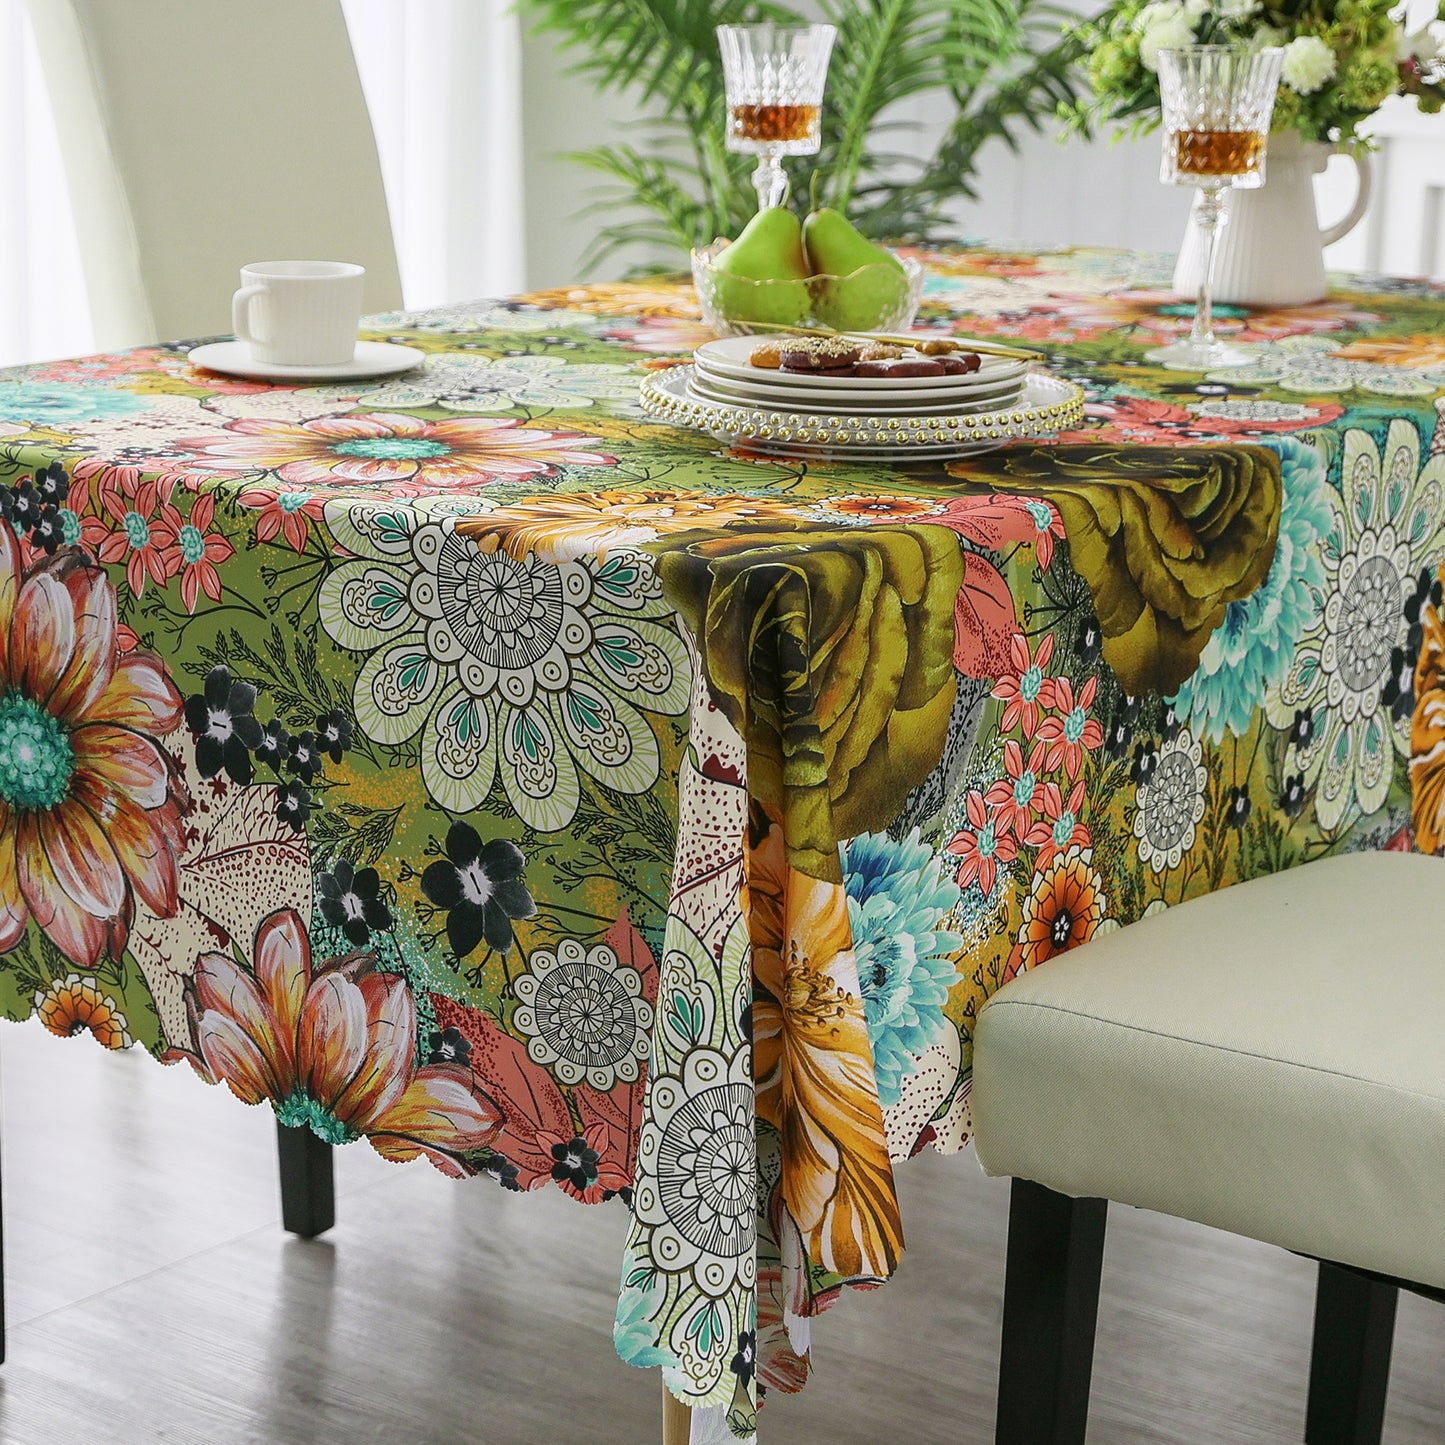 Original Design Hand Drawing Art Print Scalloped Edge Tablecloth, Washable Water Resistant Microfiber Decorative Table Cover